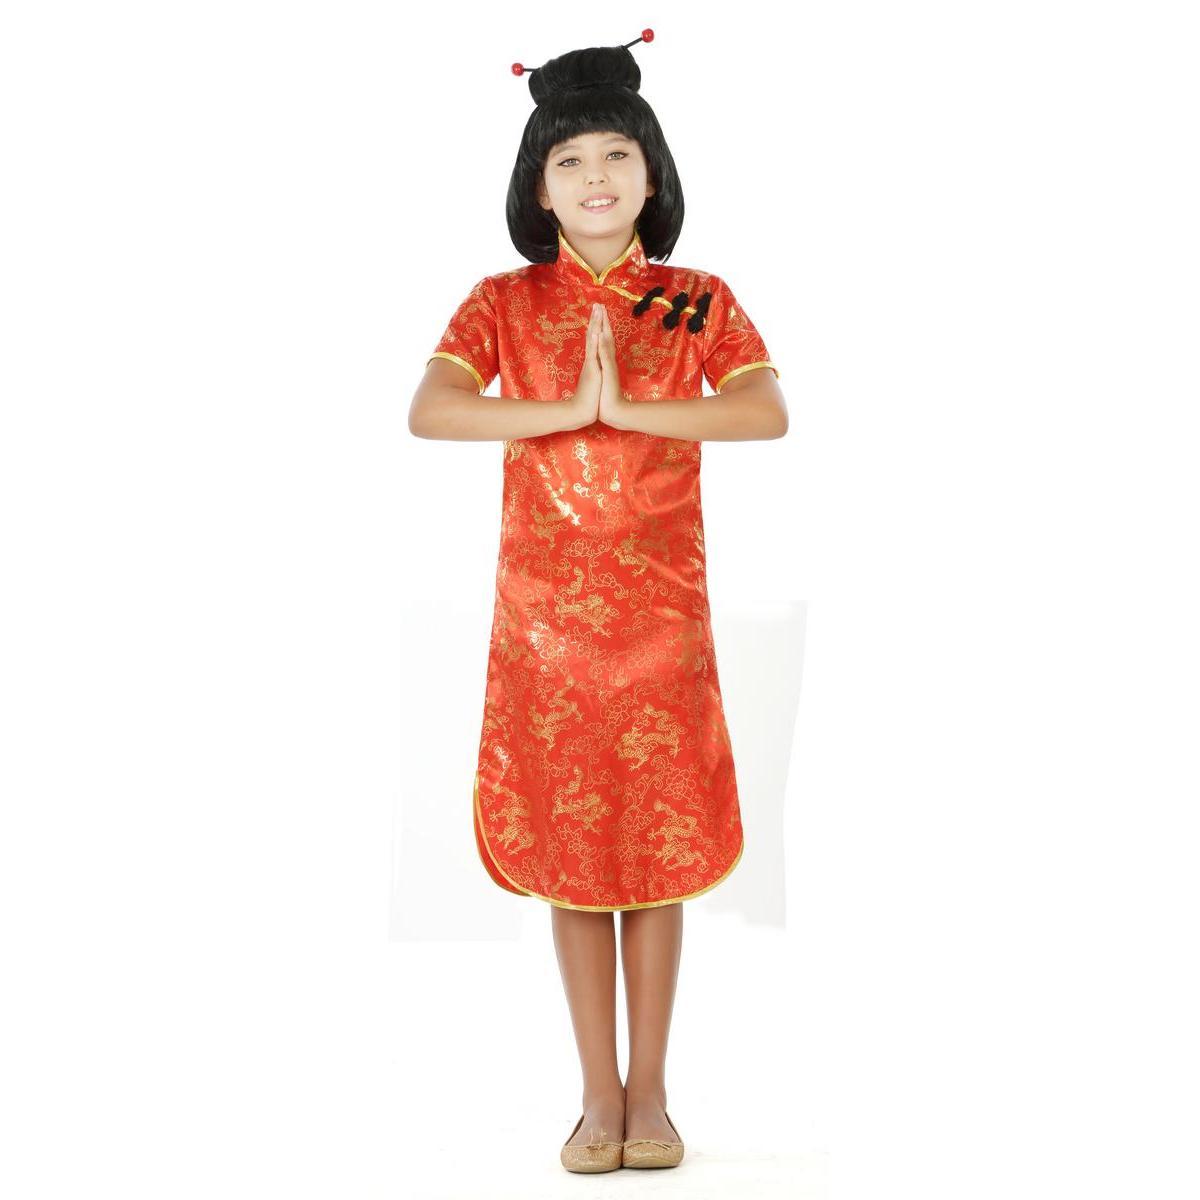 Vêtement traditionnel chinois (qipao) - 3 à 12 ans - Rouge, or